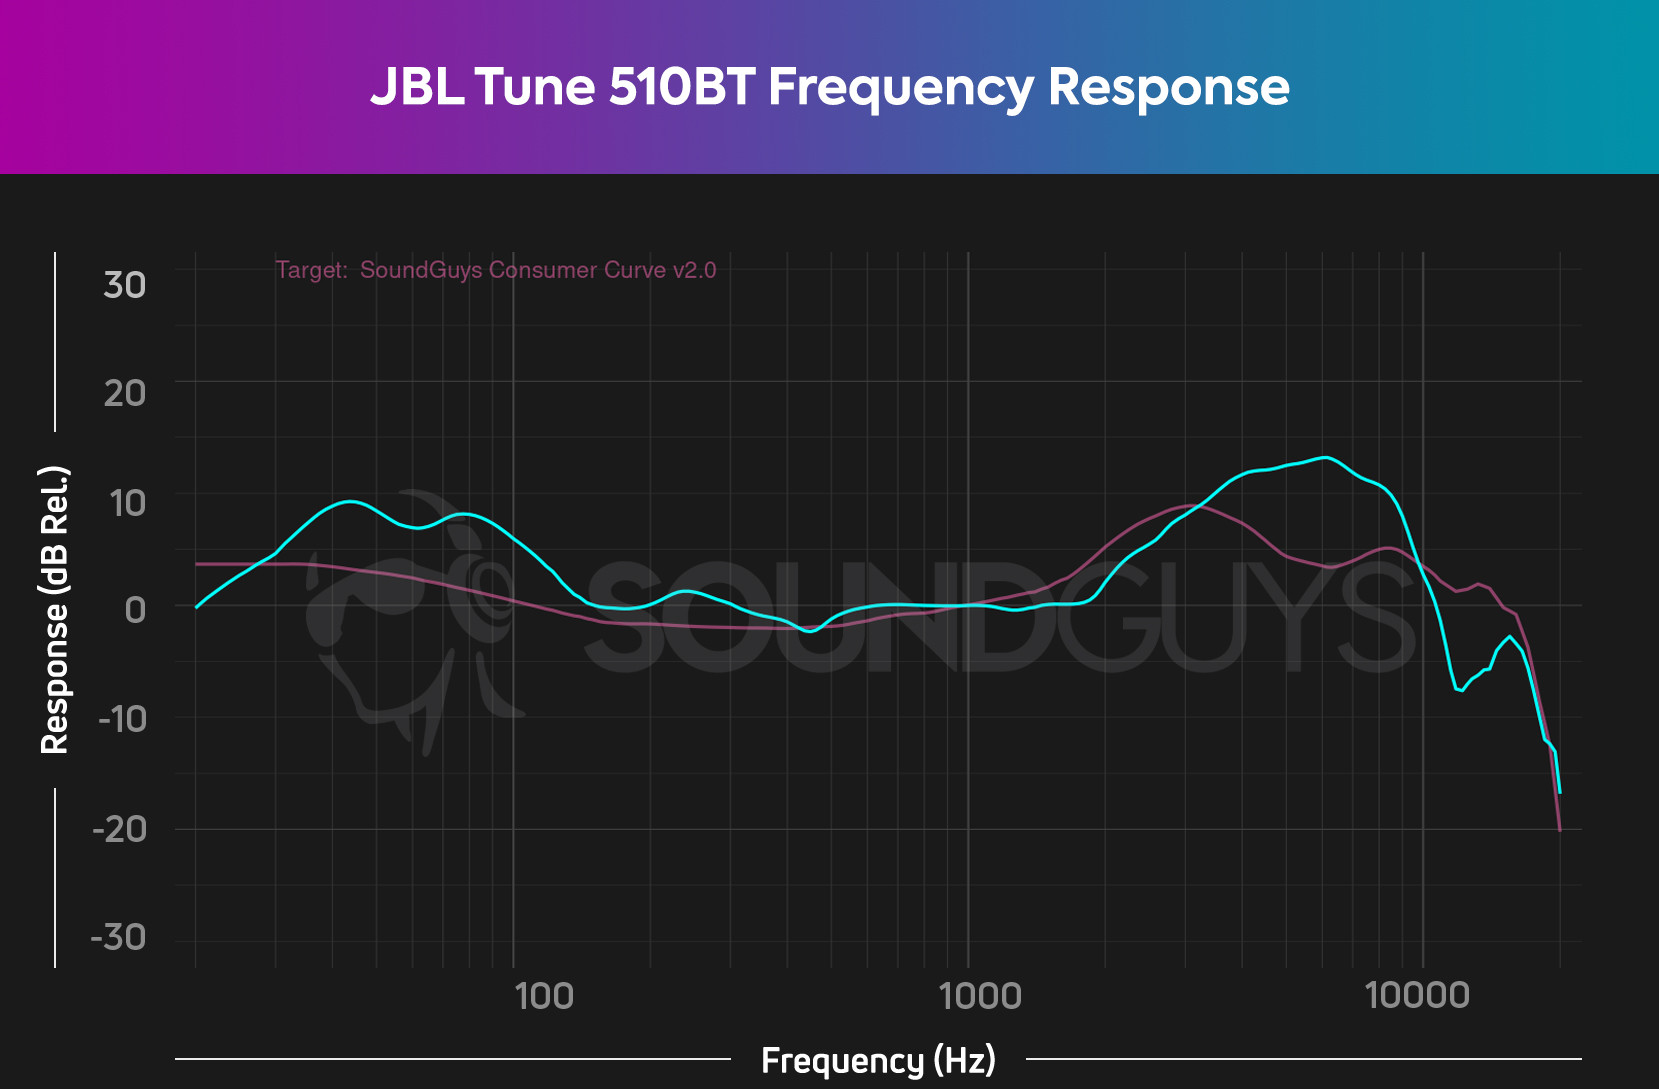 The frequency response chart for the JBL Tune 510BT.